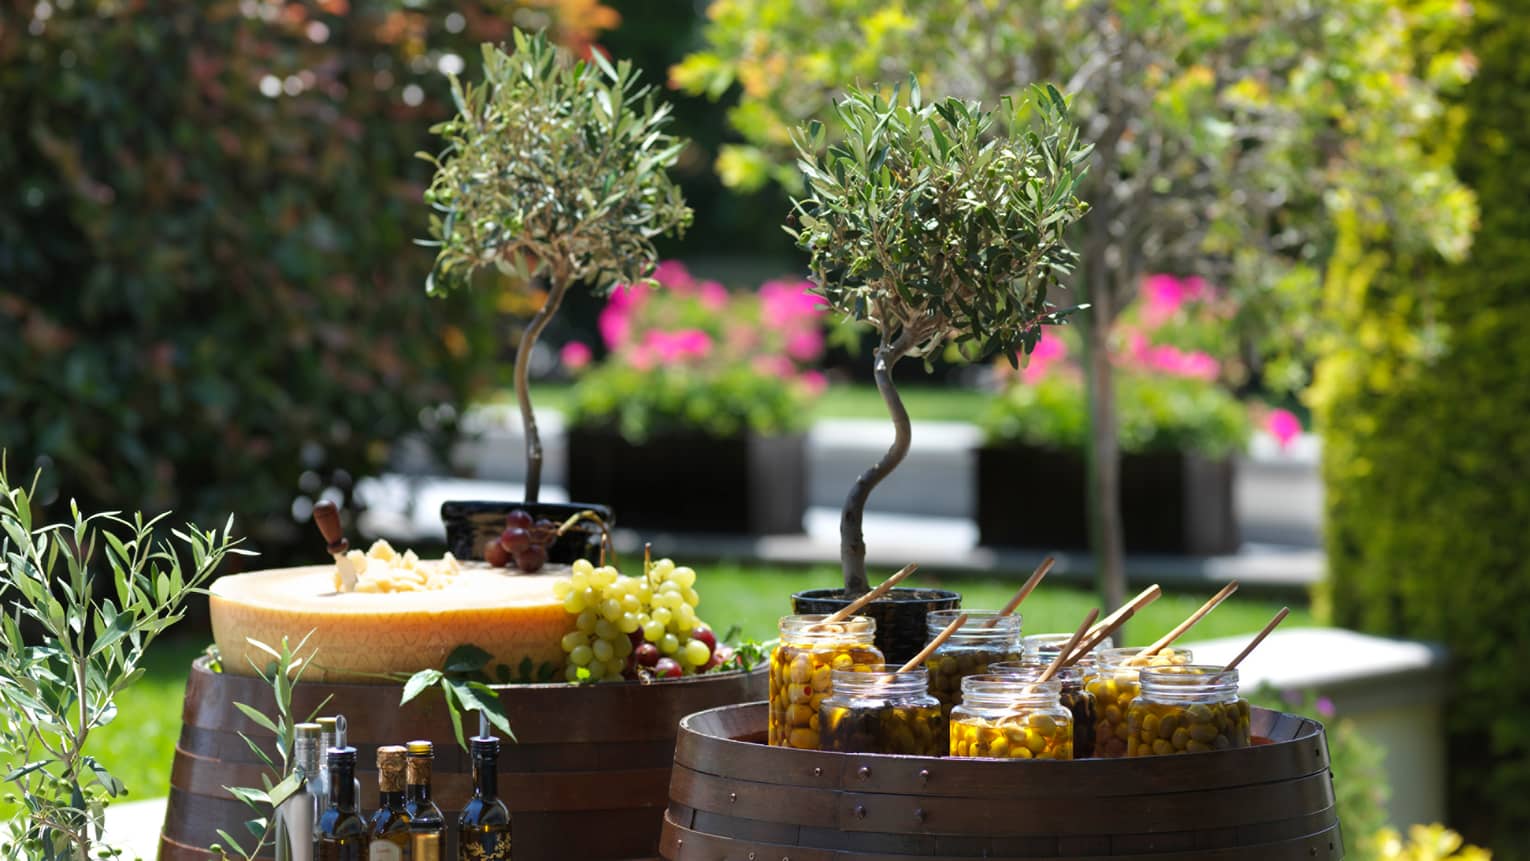 Potted olive trees, jars of olives, bottles of oil, a Parmesan cheese wheel, and grapes served atop two barrels in a garden.